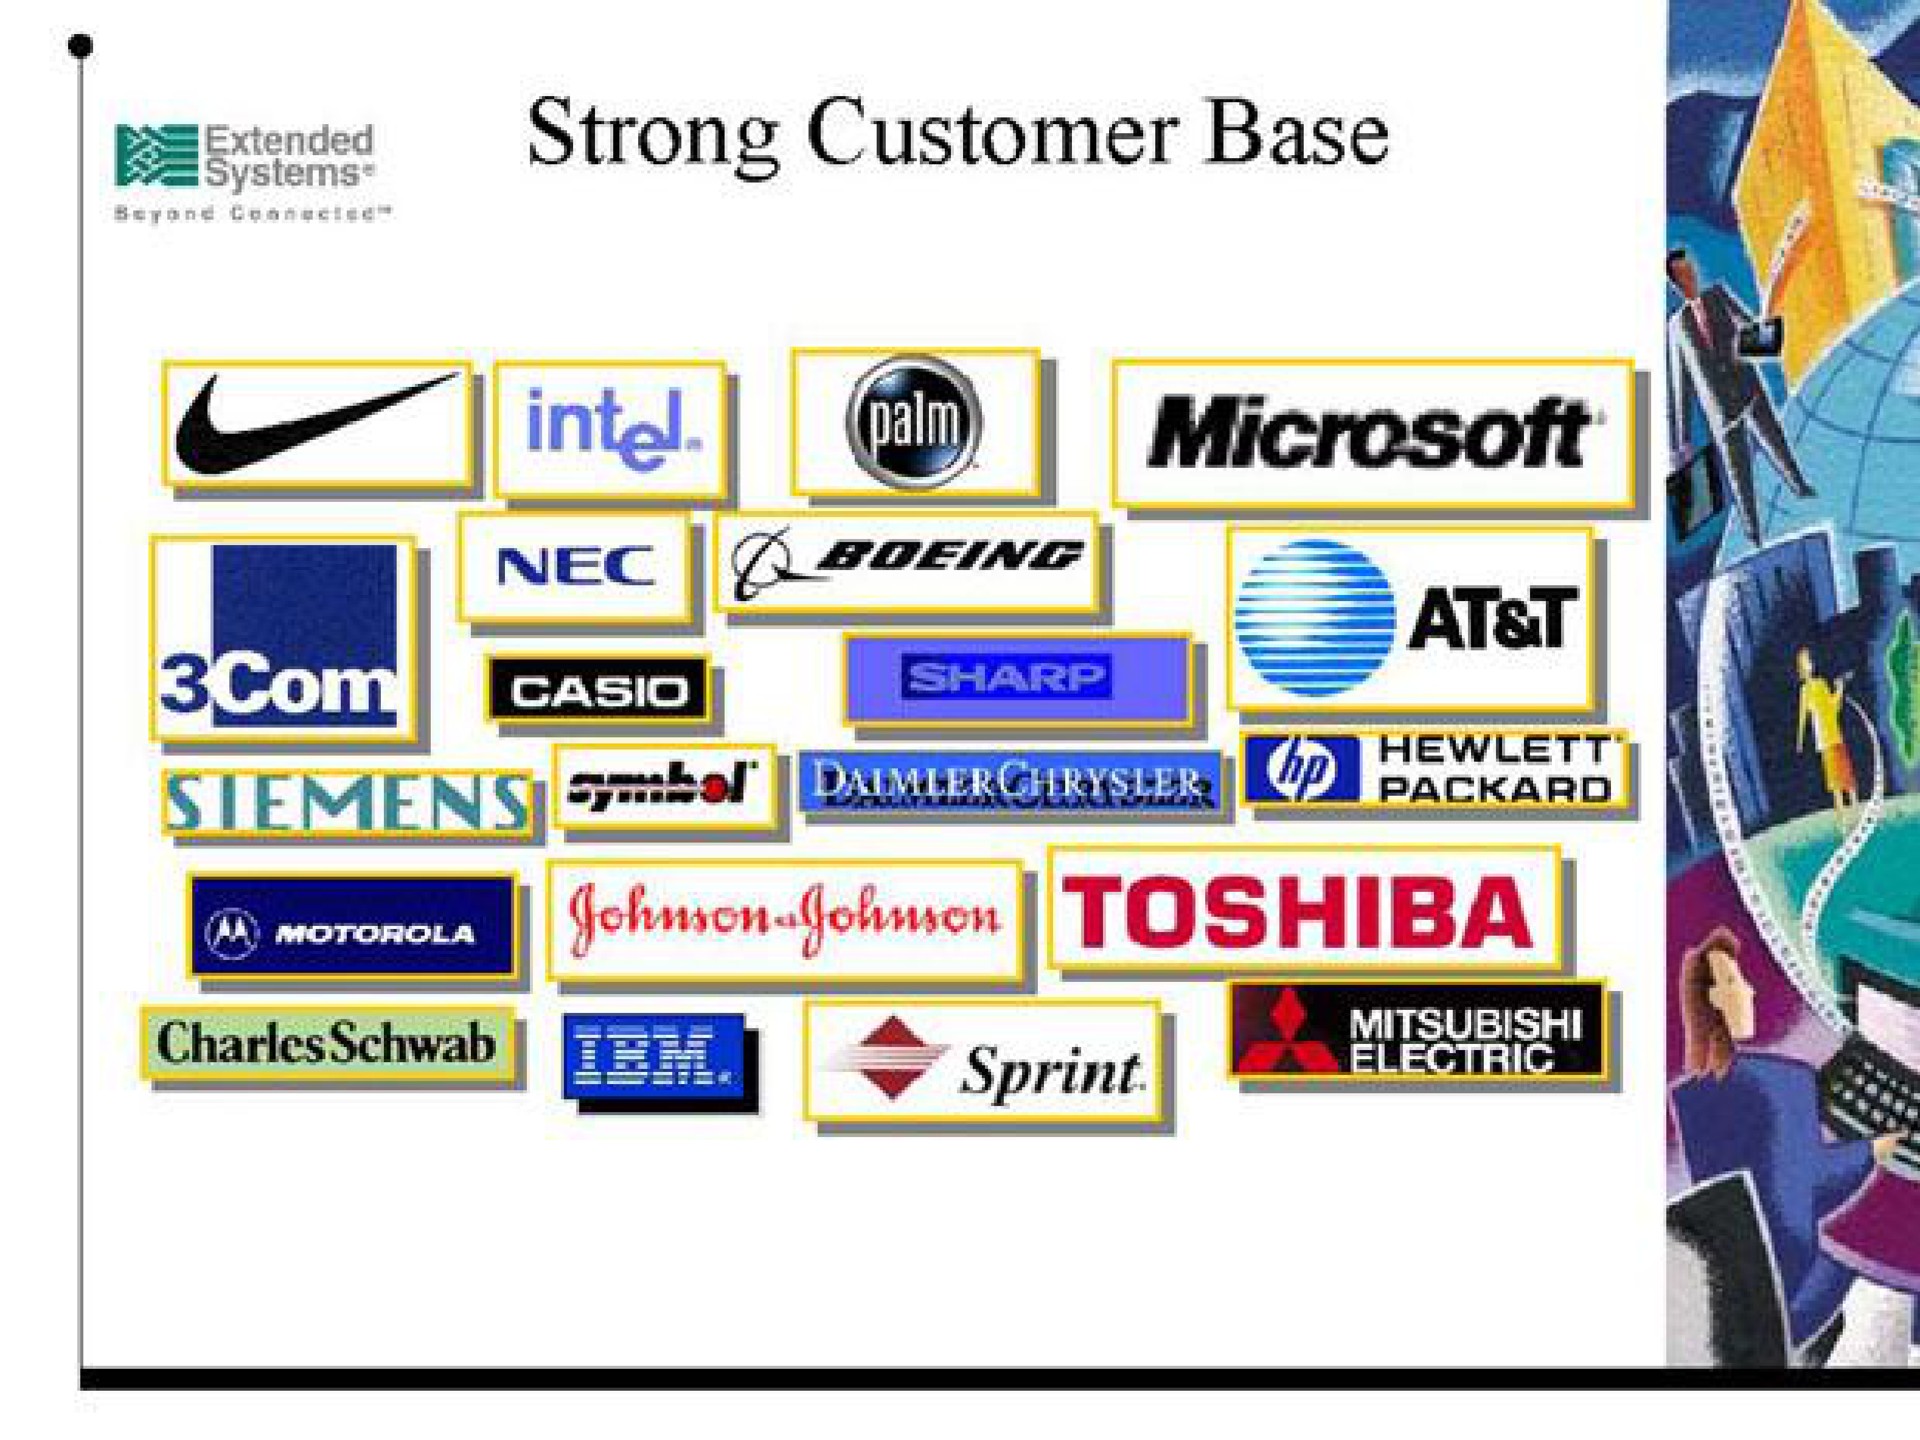 strong customer base | Extended Systems